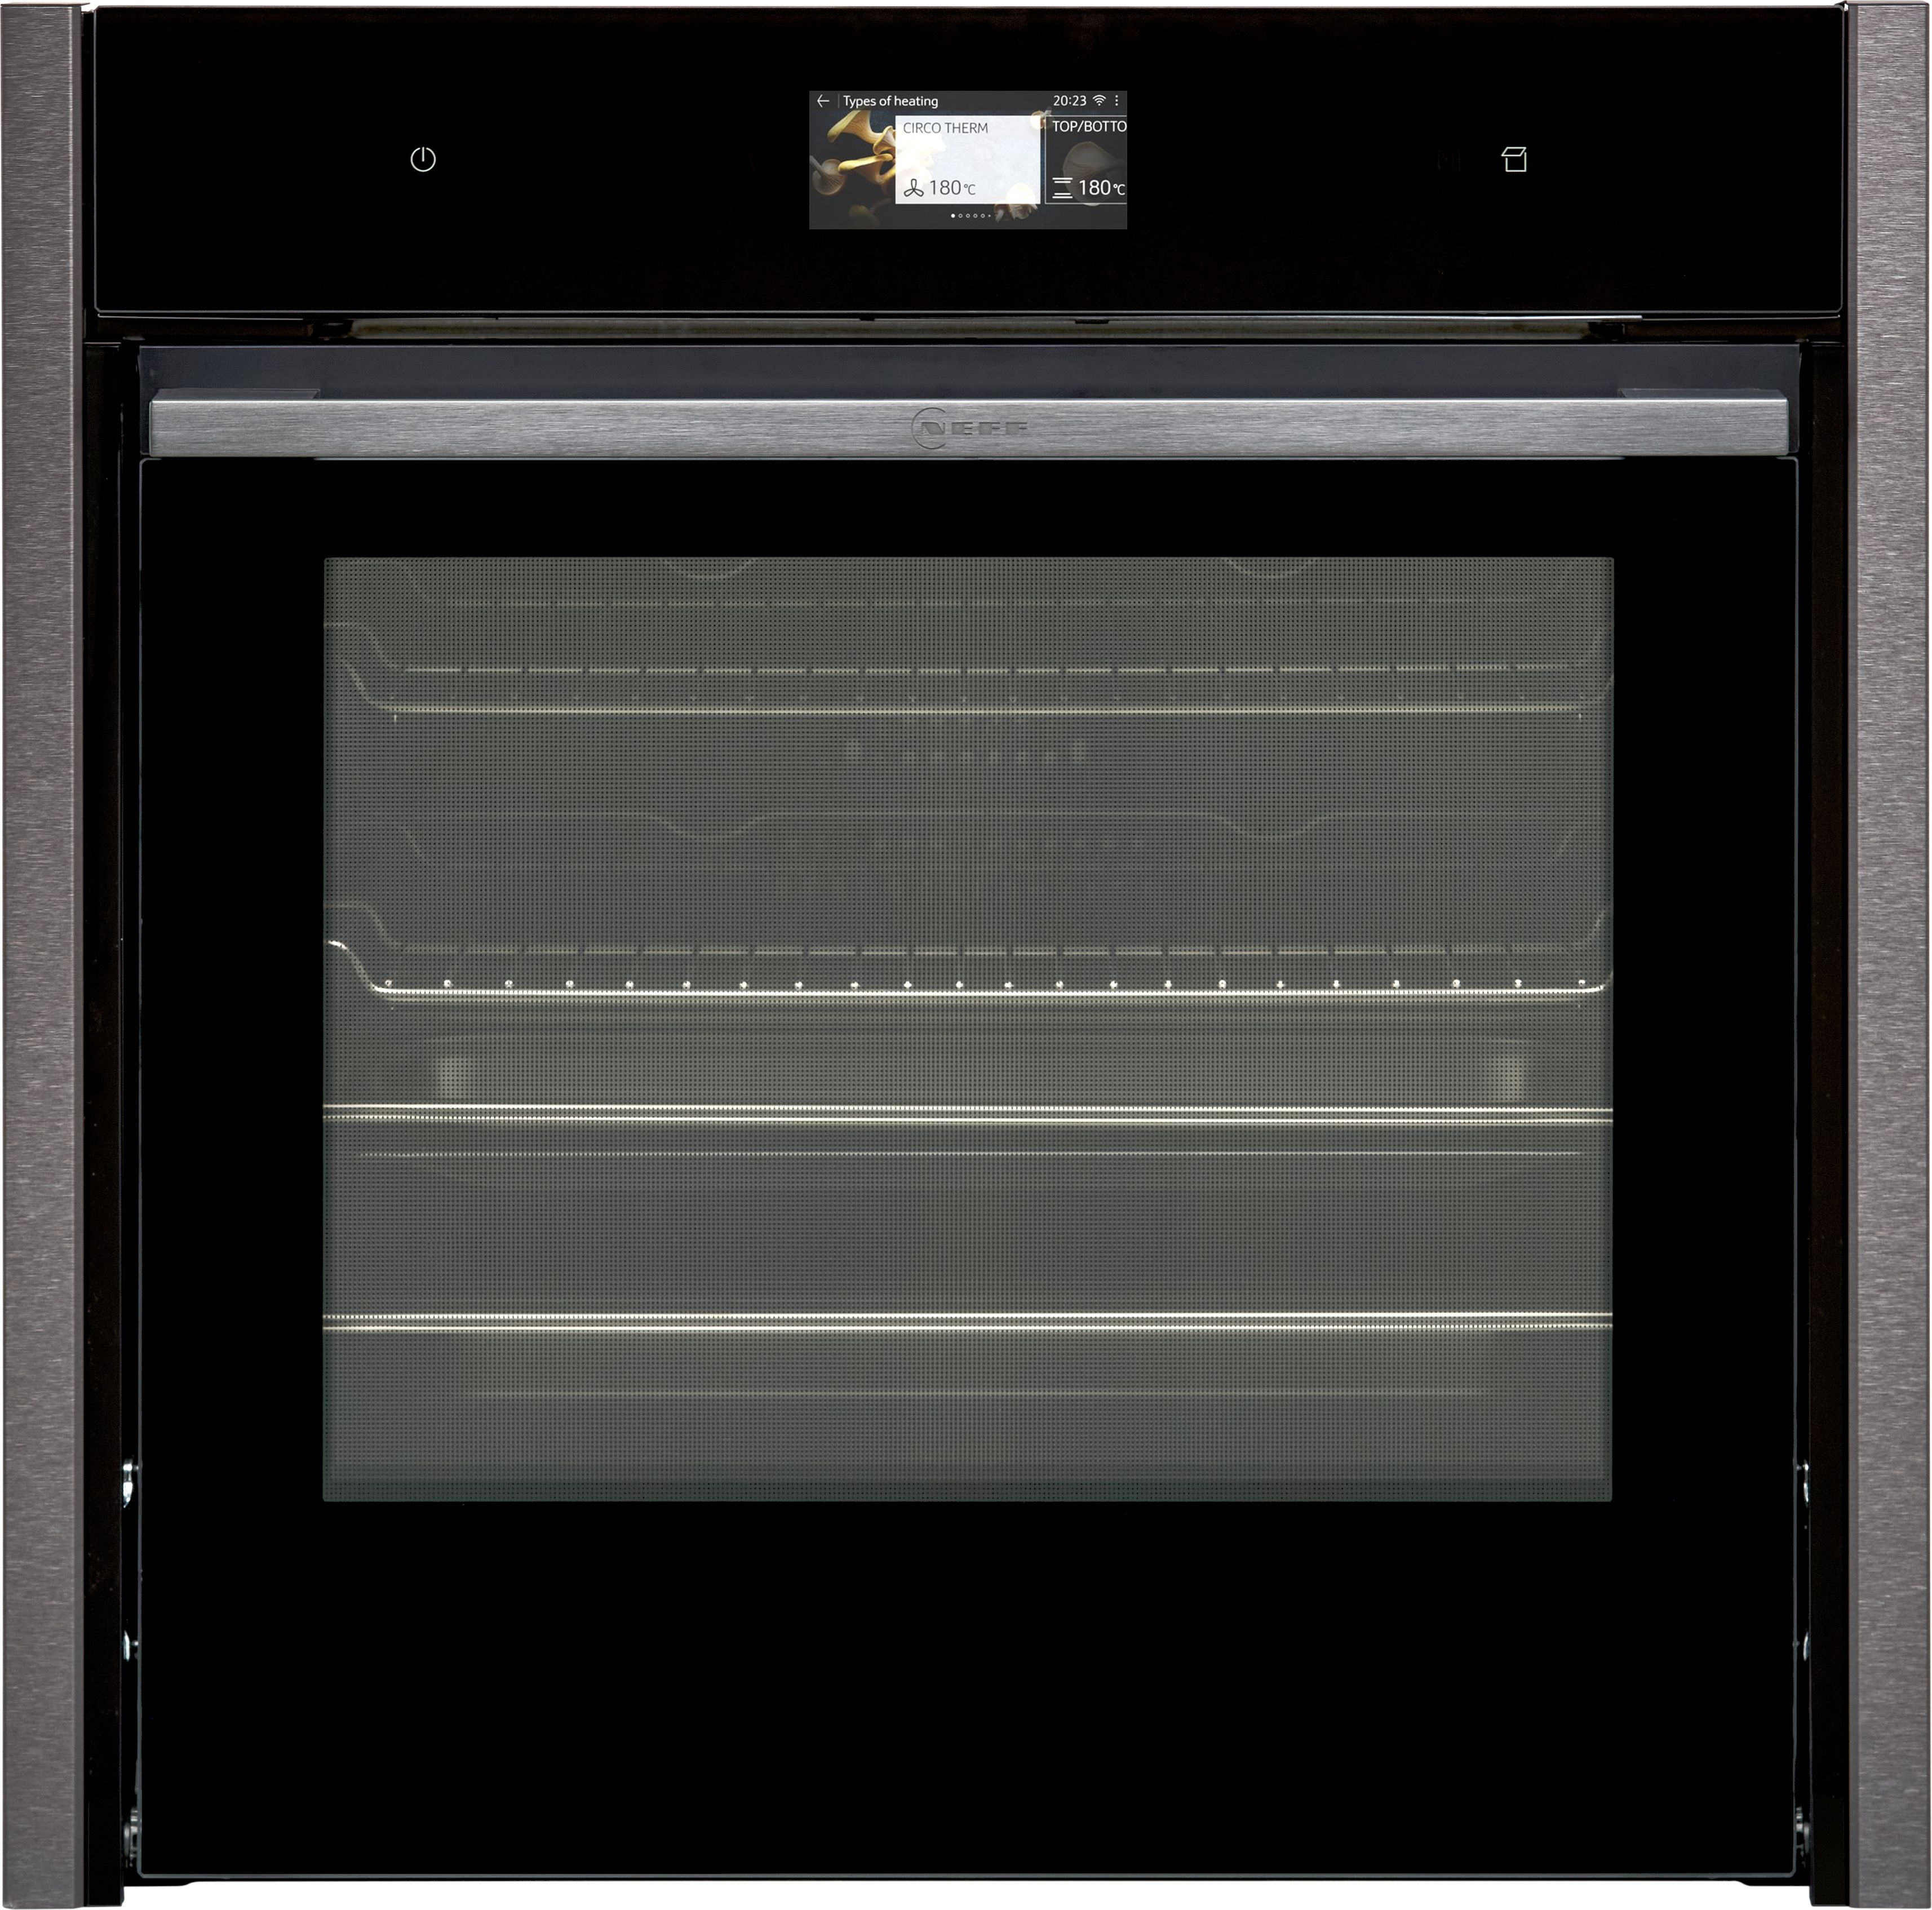 NEFF N90 B64FS31G0B Built In Electric Single Oven - Graphite - A+ Rated, Silver